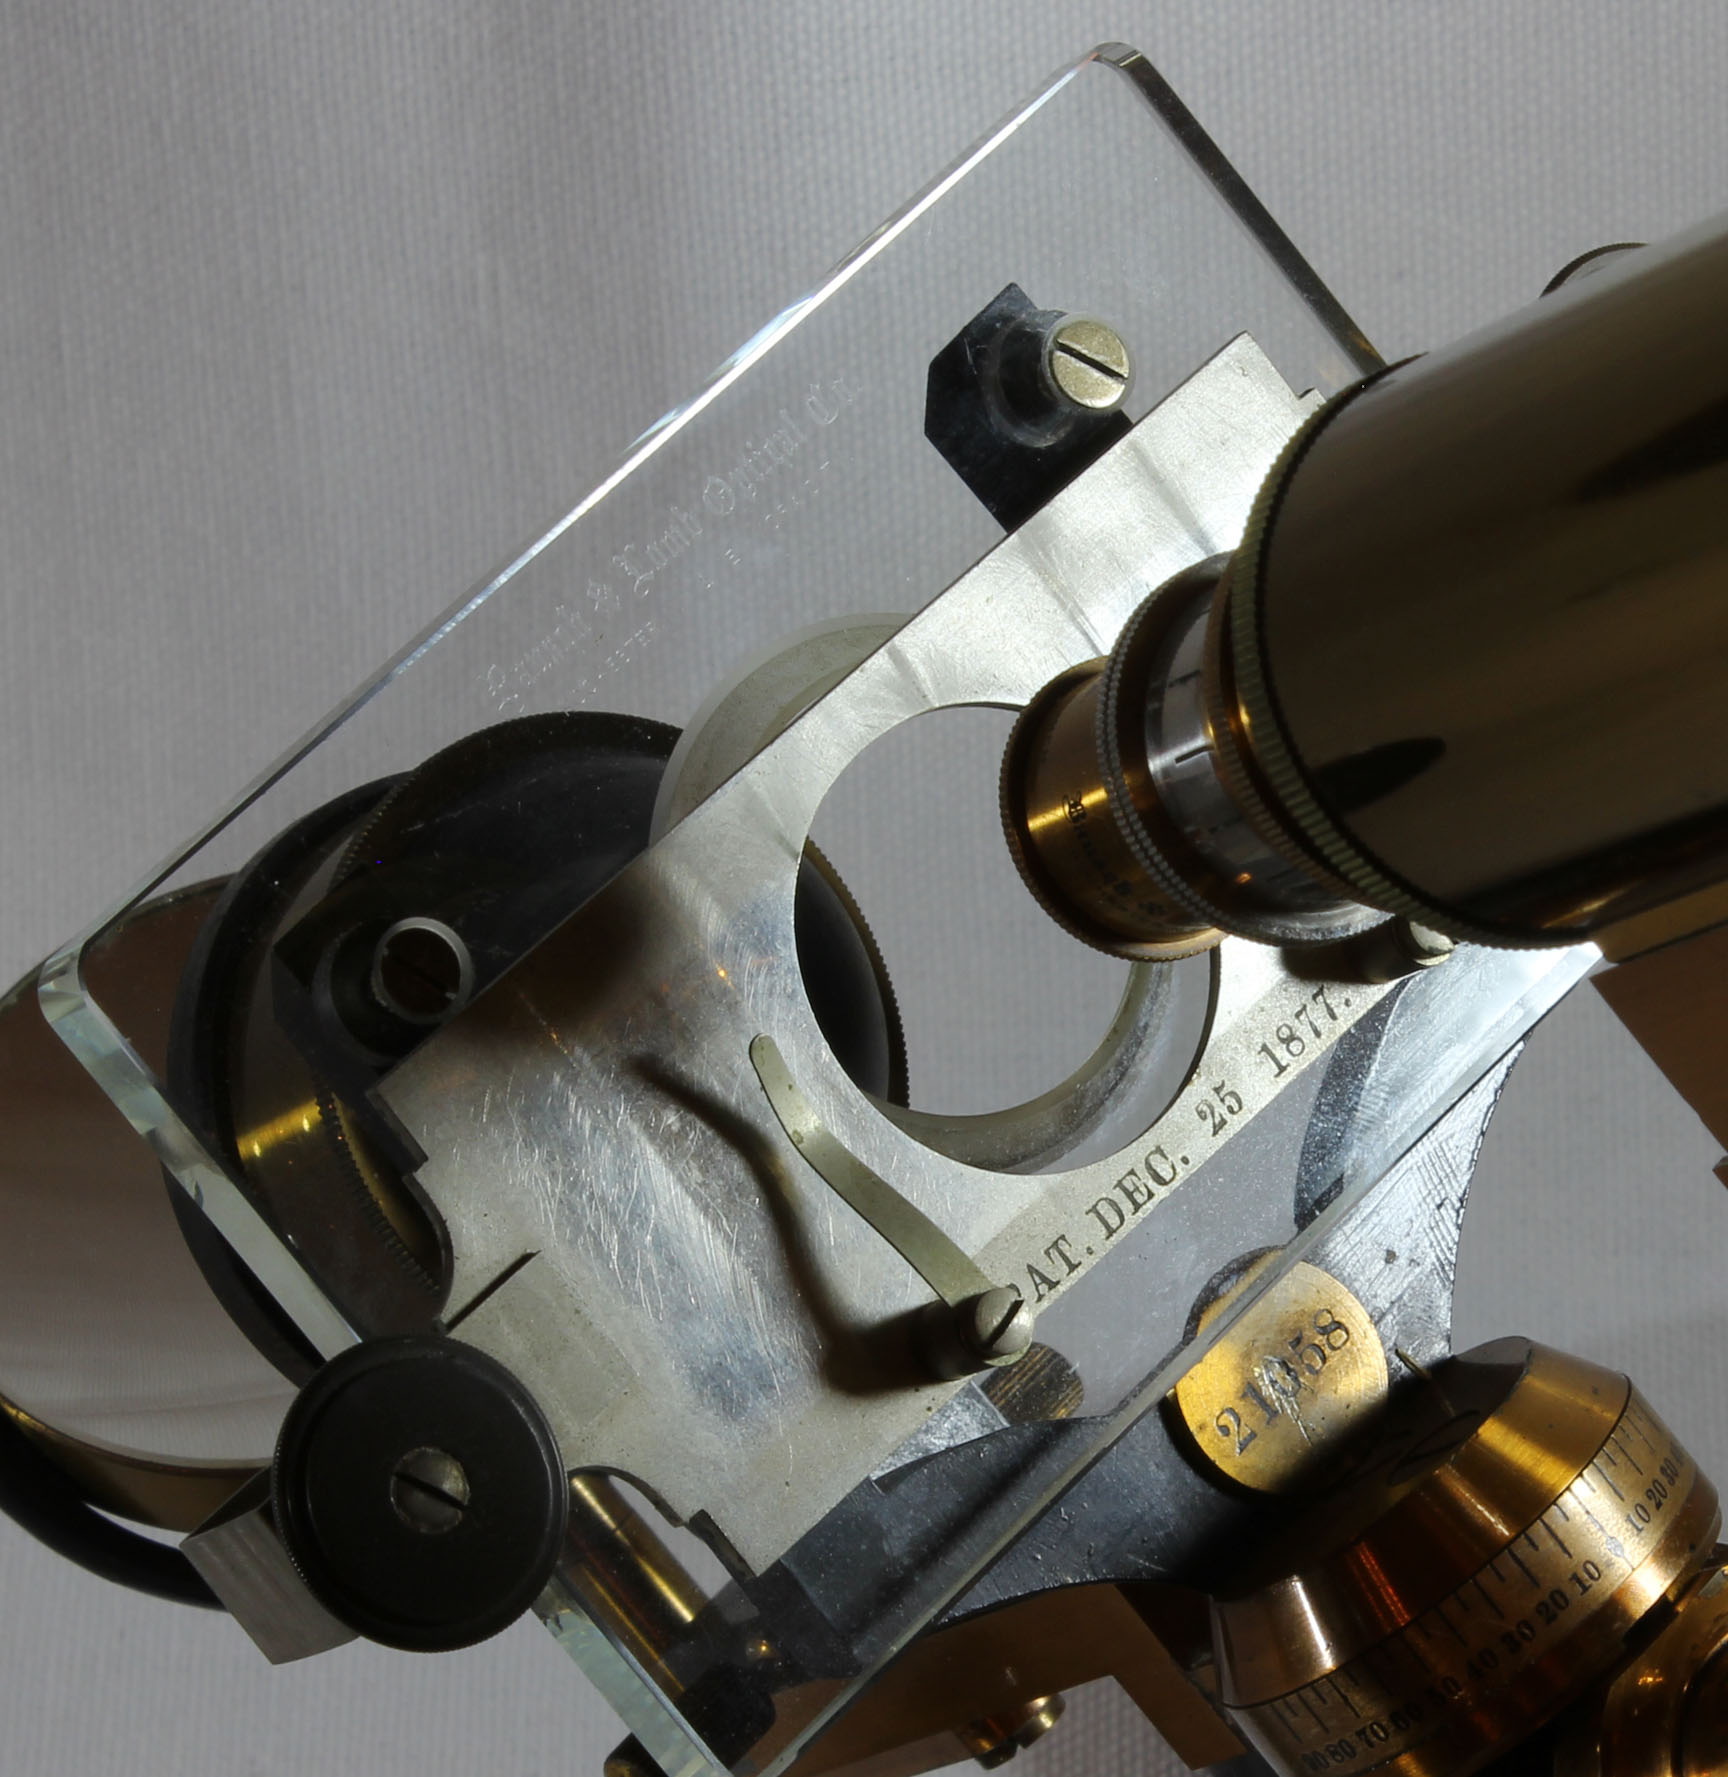 Physicians Microscope view